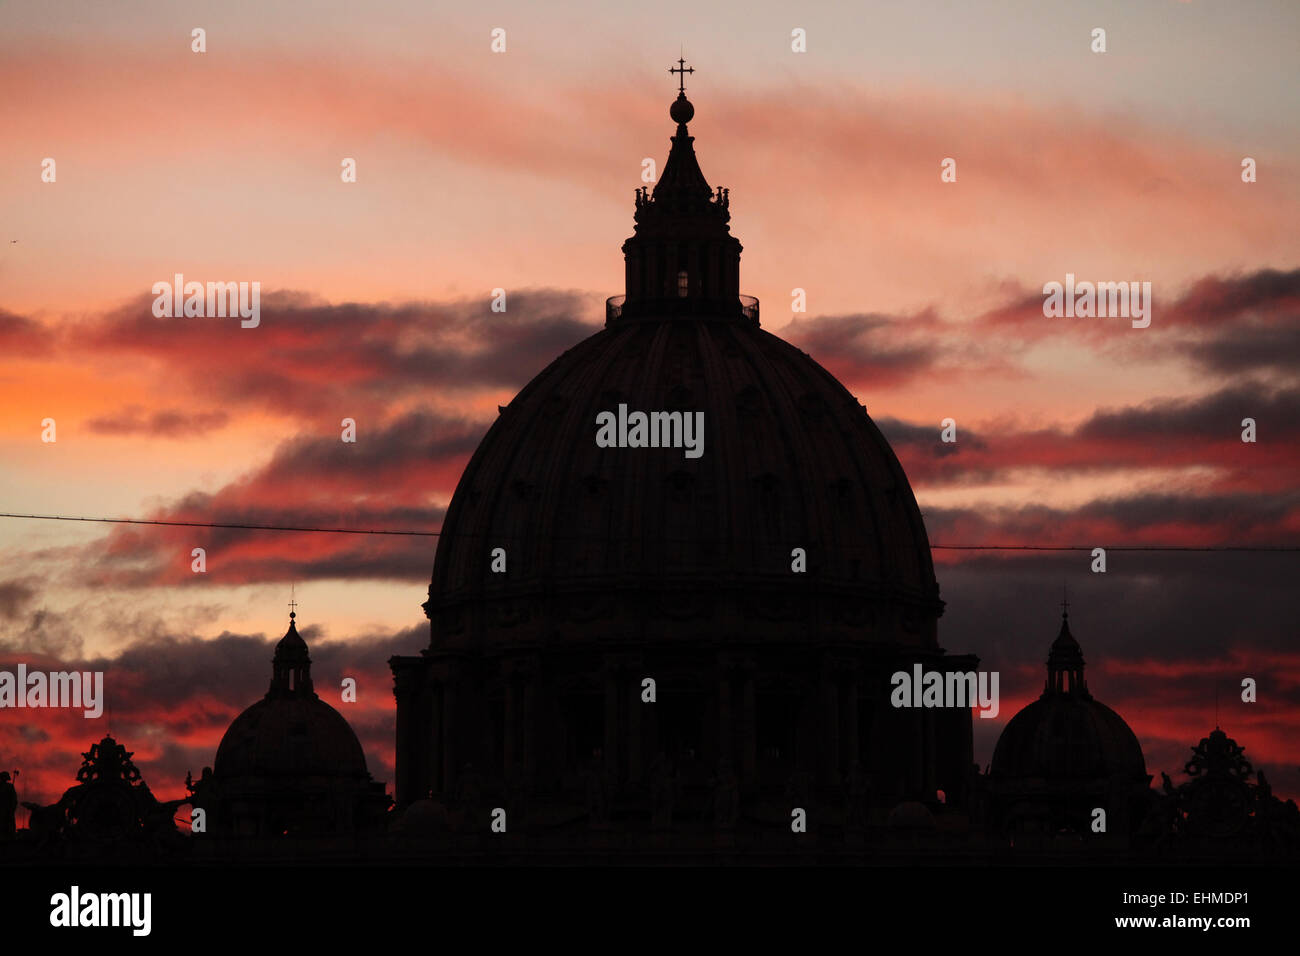 Sunset over the dome of Saint Peter's Basilica in Vatican City in Rome, Lazio, Italy. Stock Photo